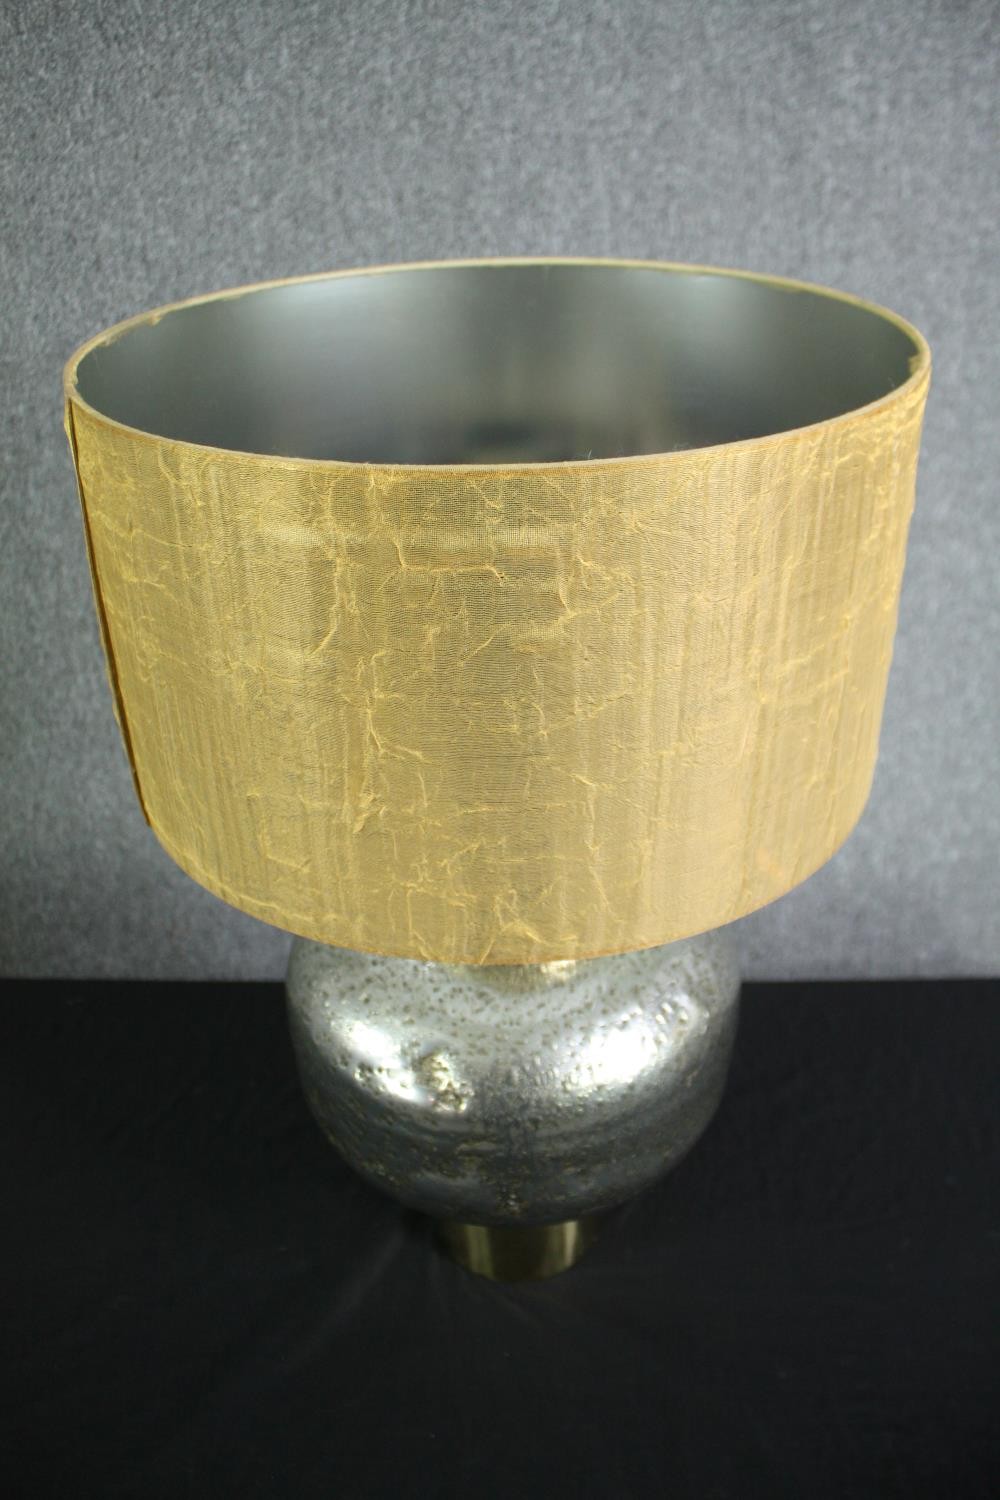 A modern designer table lamp. Brass and steel. With a distressed pitted finished and brass base. The - Image 2 of 5